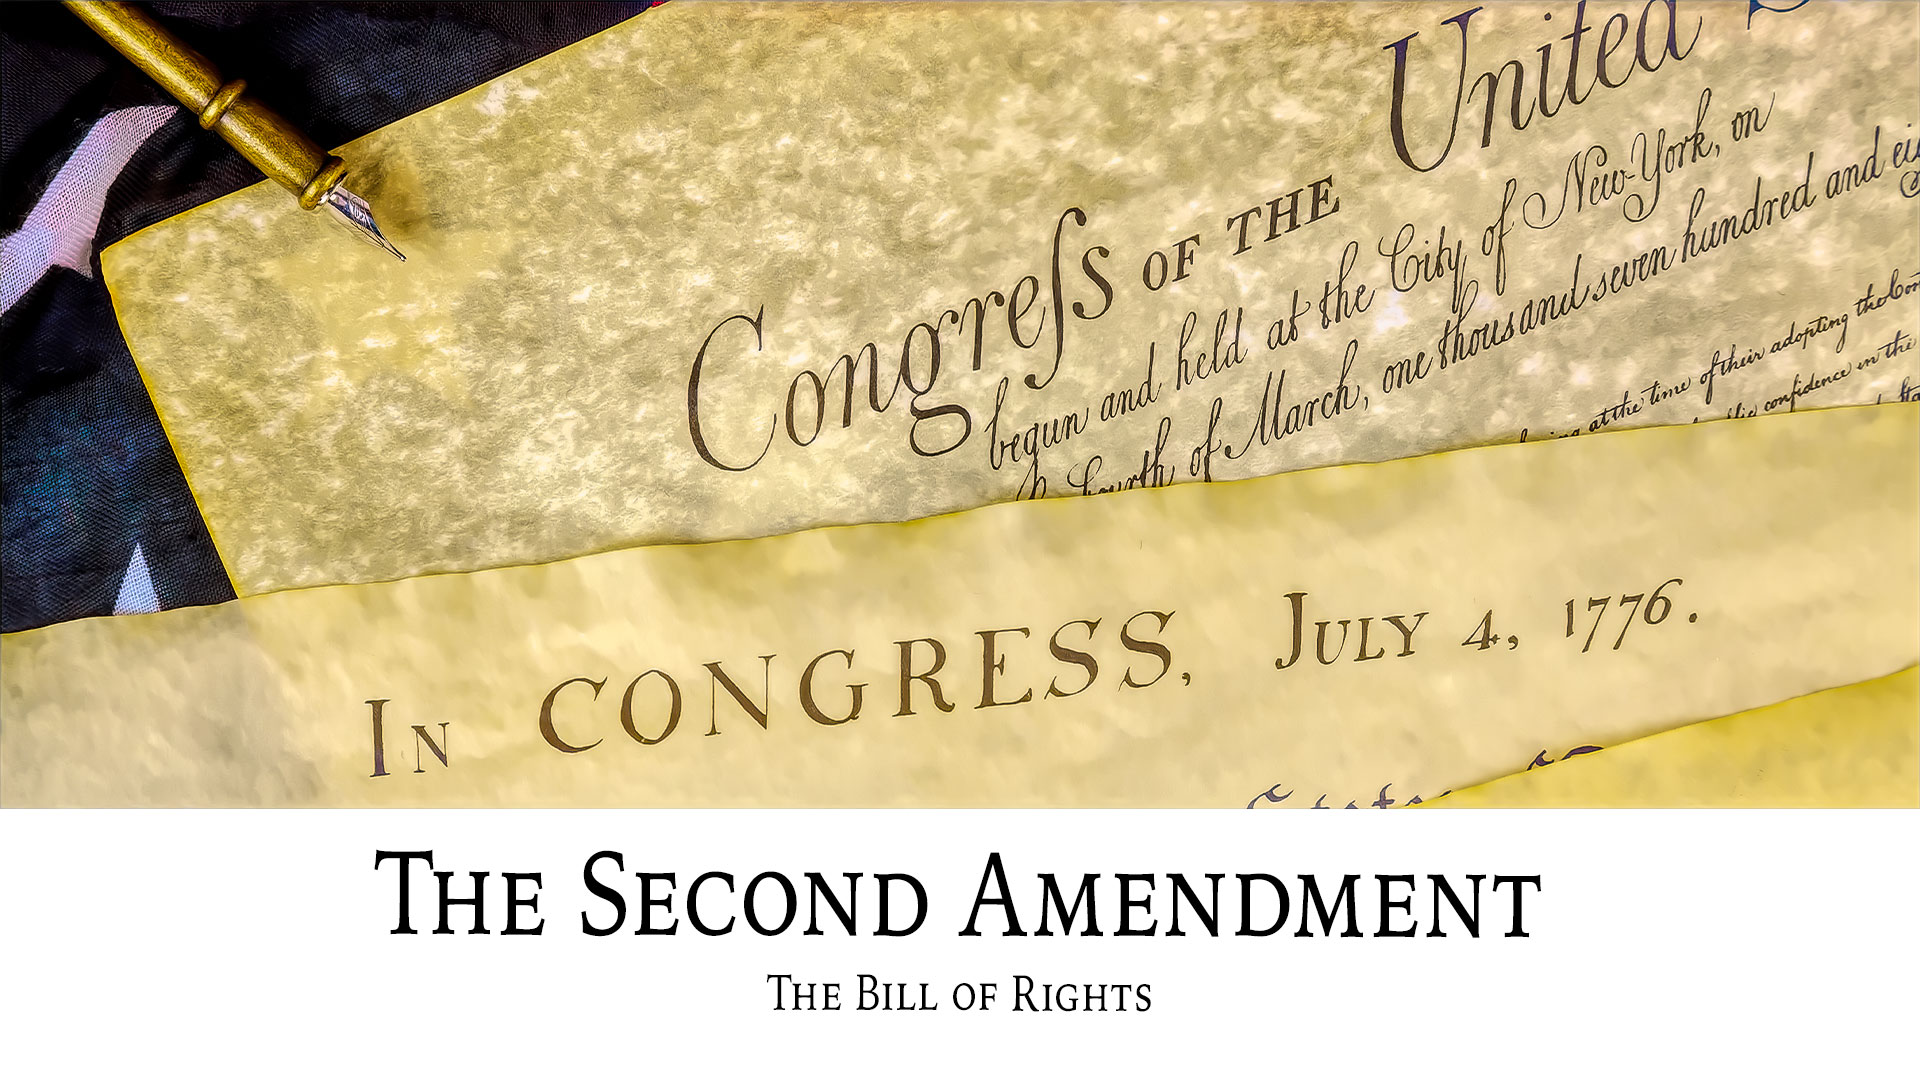 The Second Amendment: The Bill of Rights Ancestral Findings